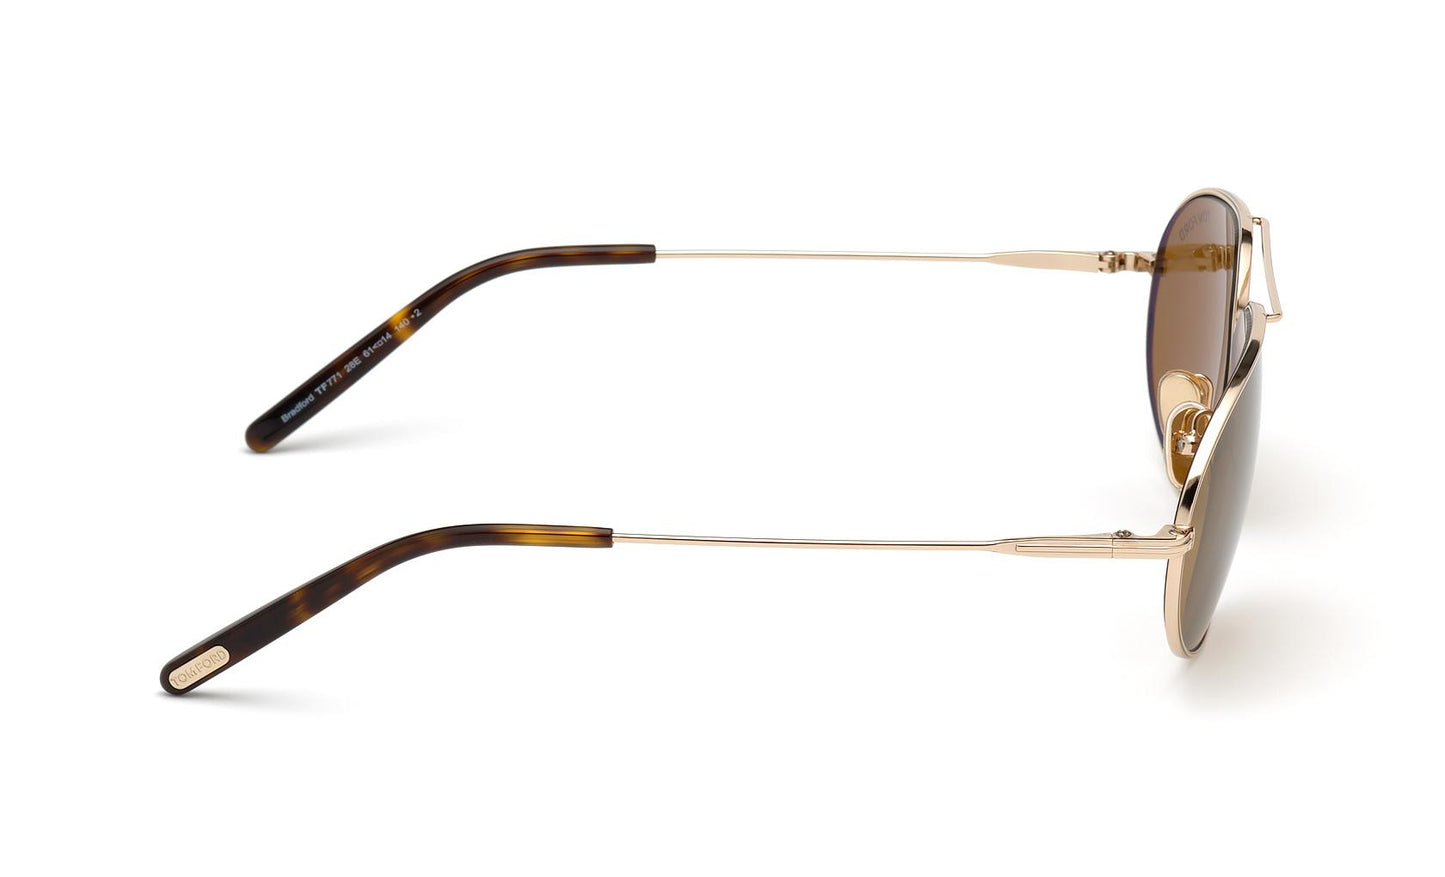 Load image into Gallery viewer, Tom Ford Bradford Sunglasses FT0771 28E
